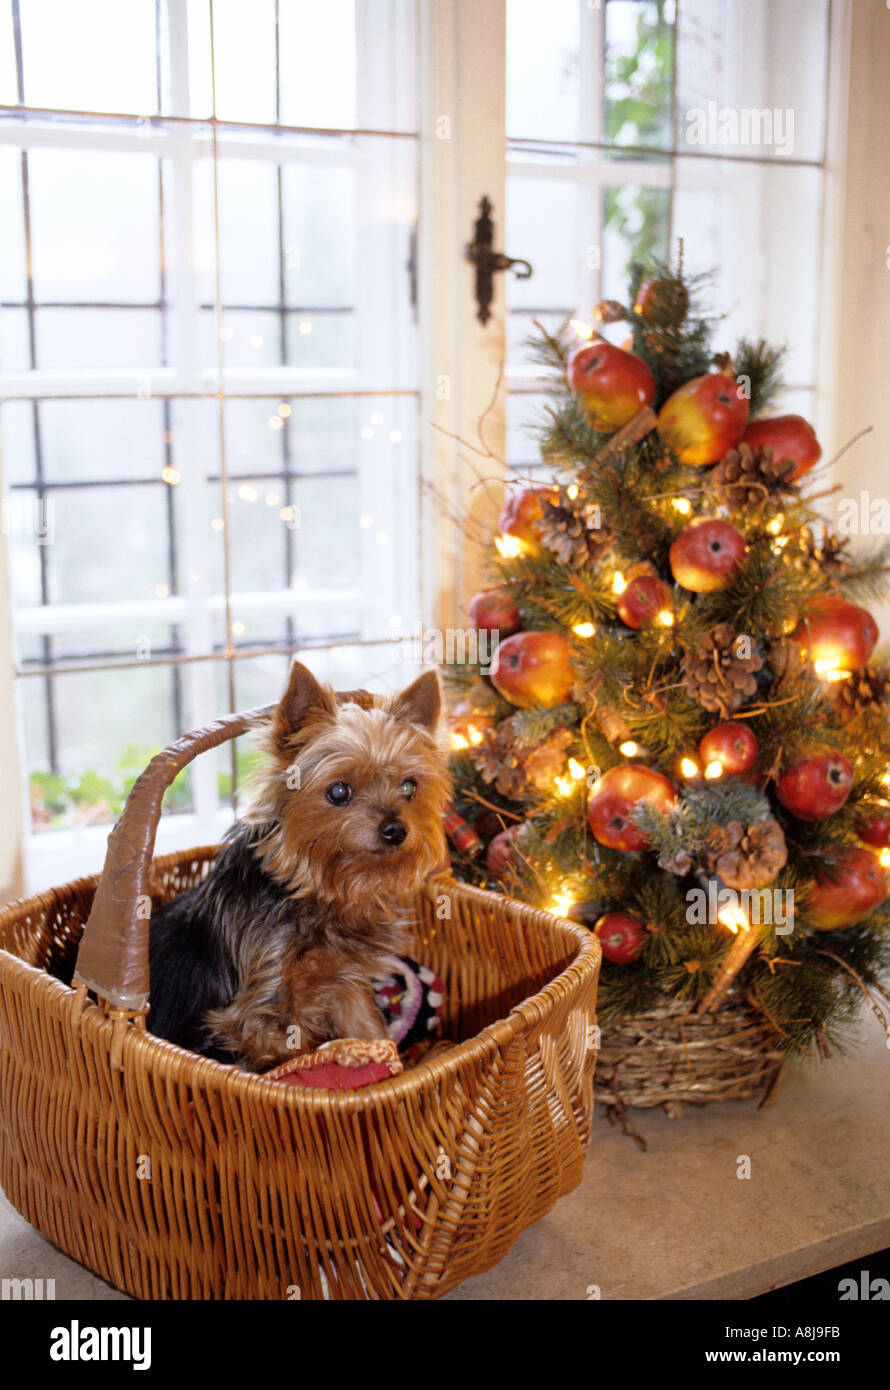 Pet dog in its basket by the family Christmas tree Stock Photo